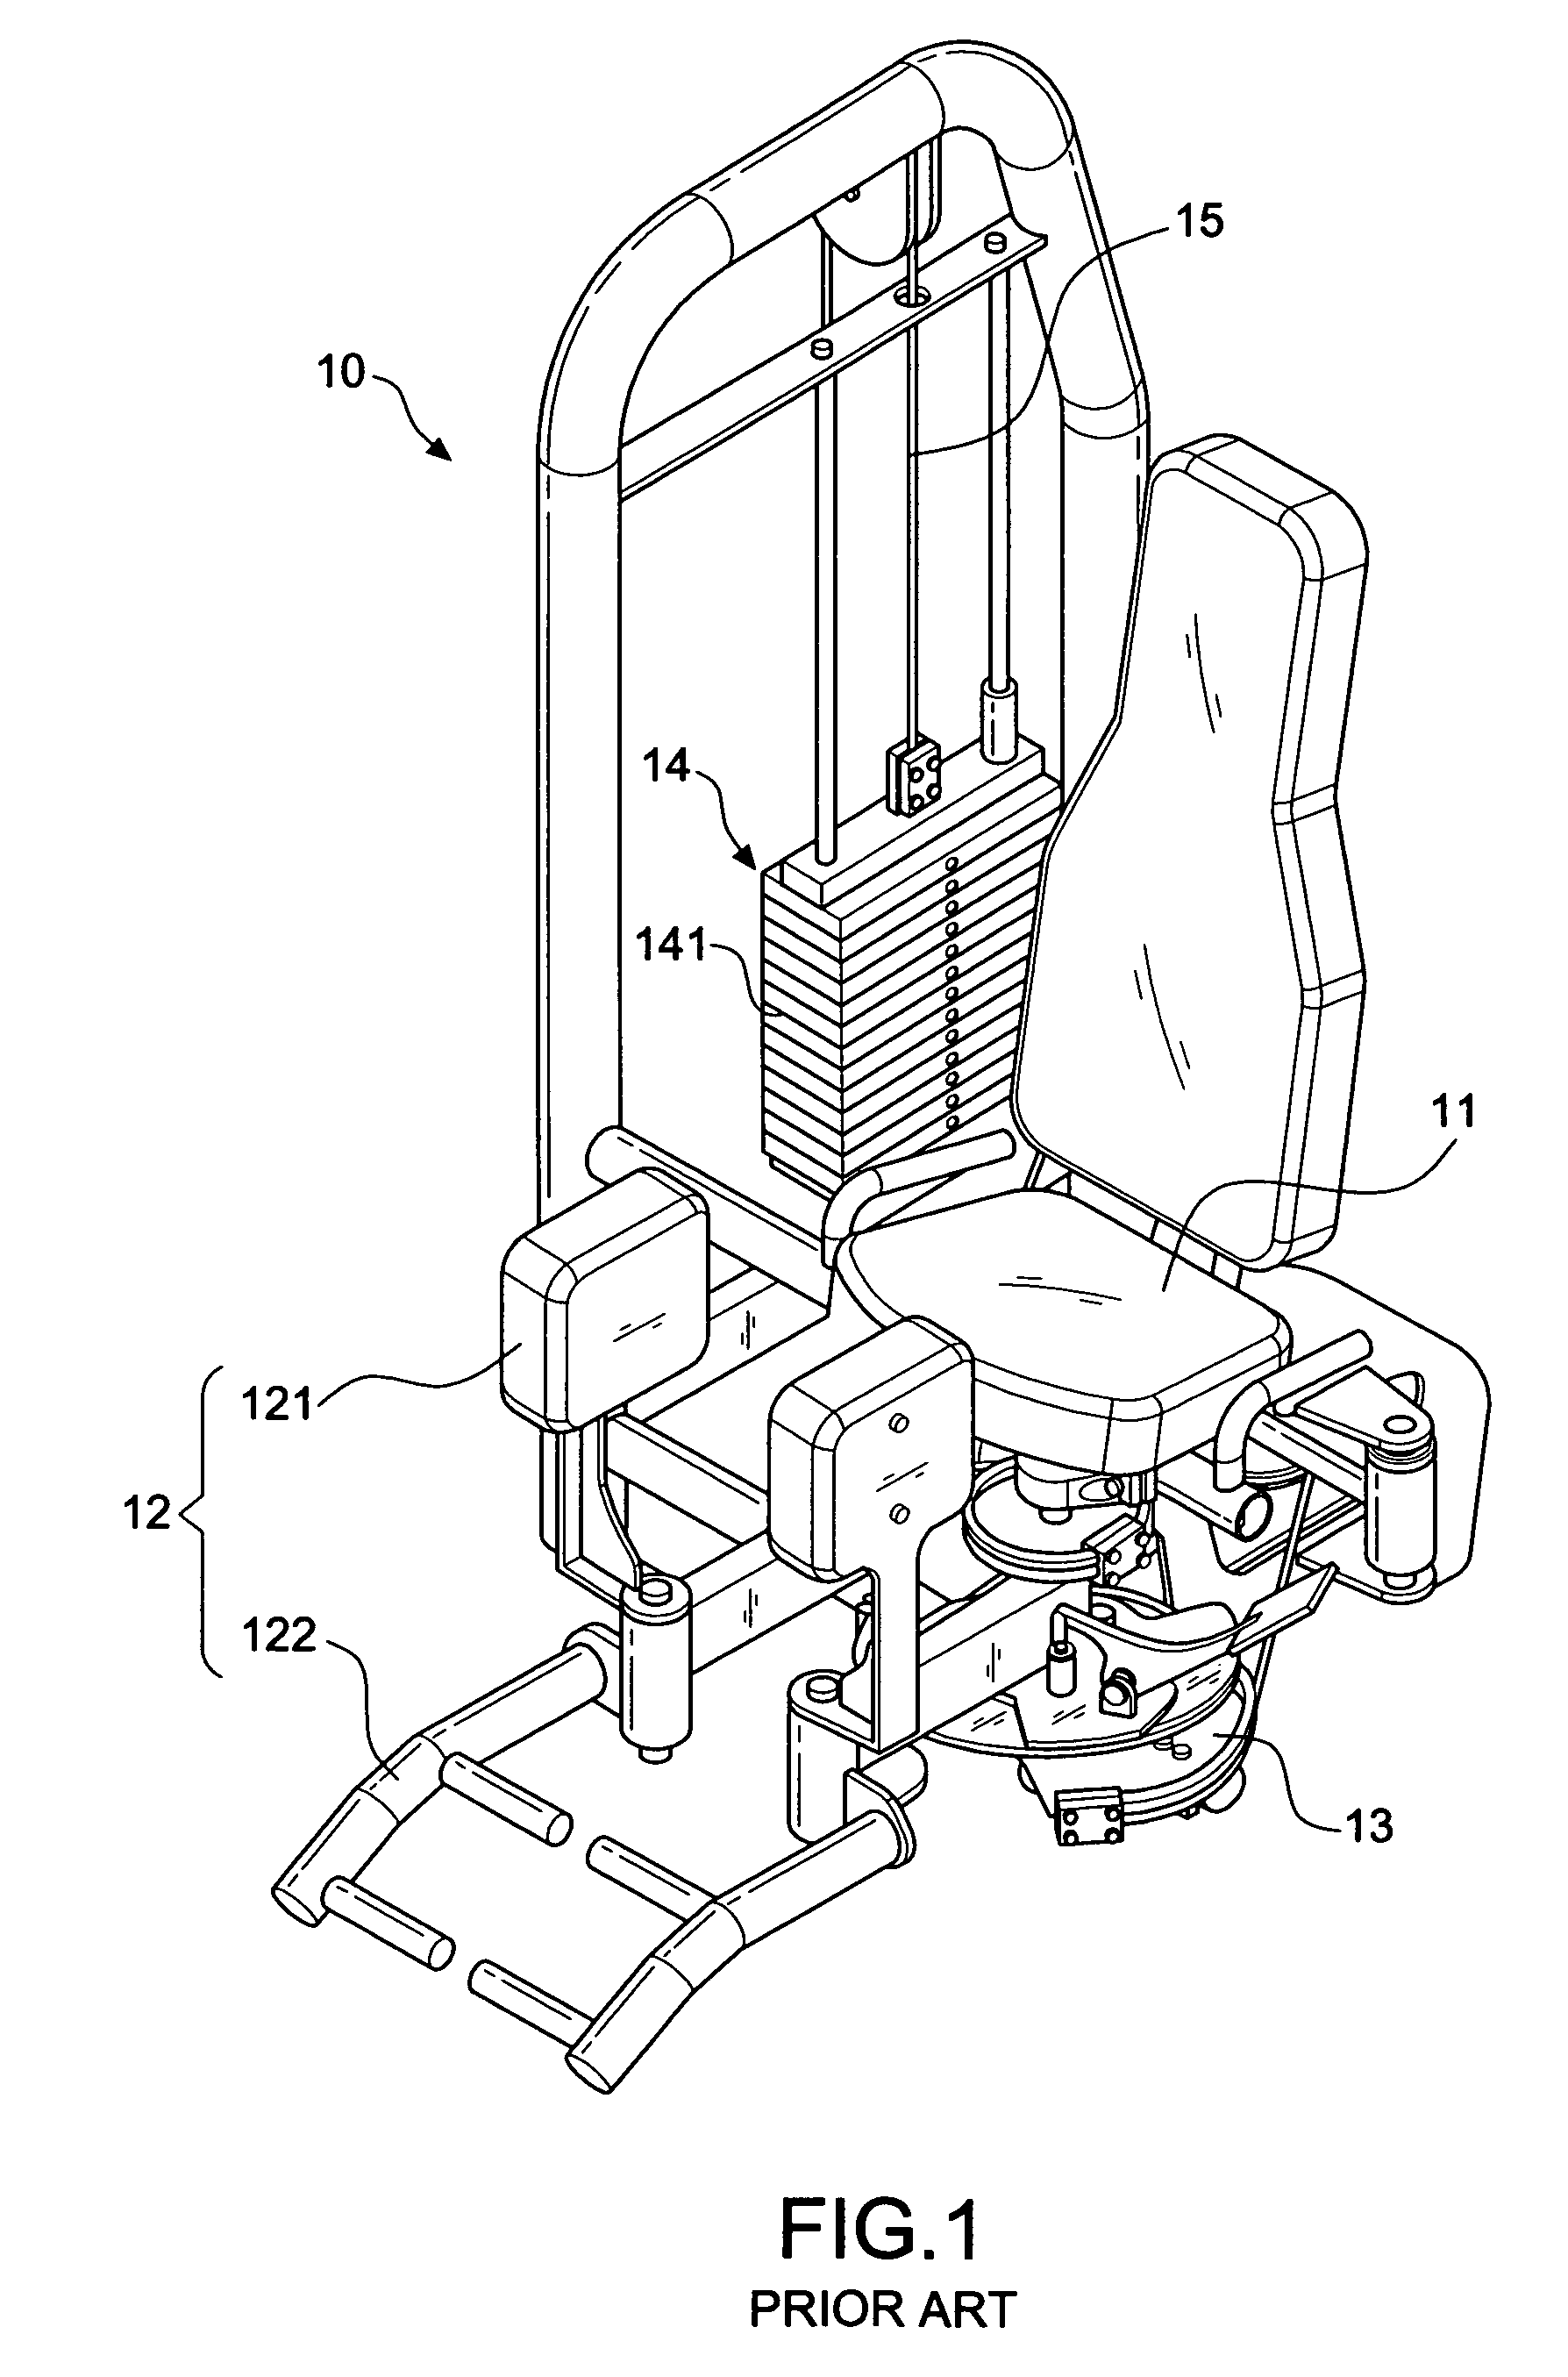 Loading device of leg extension machine